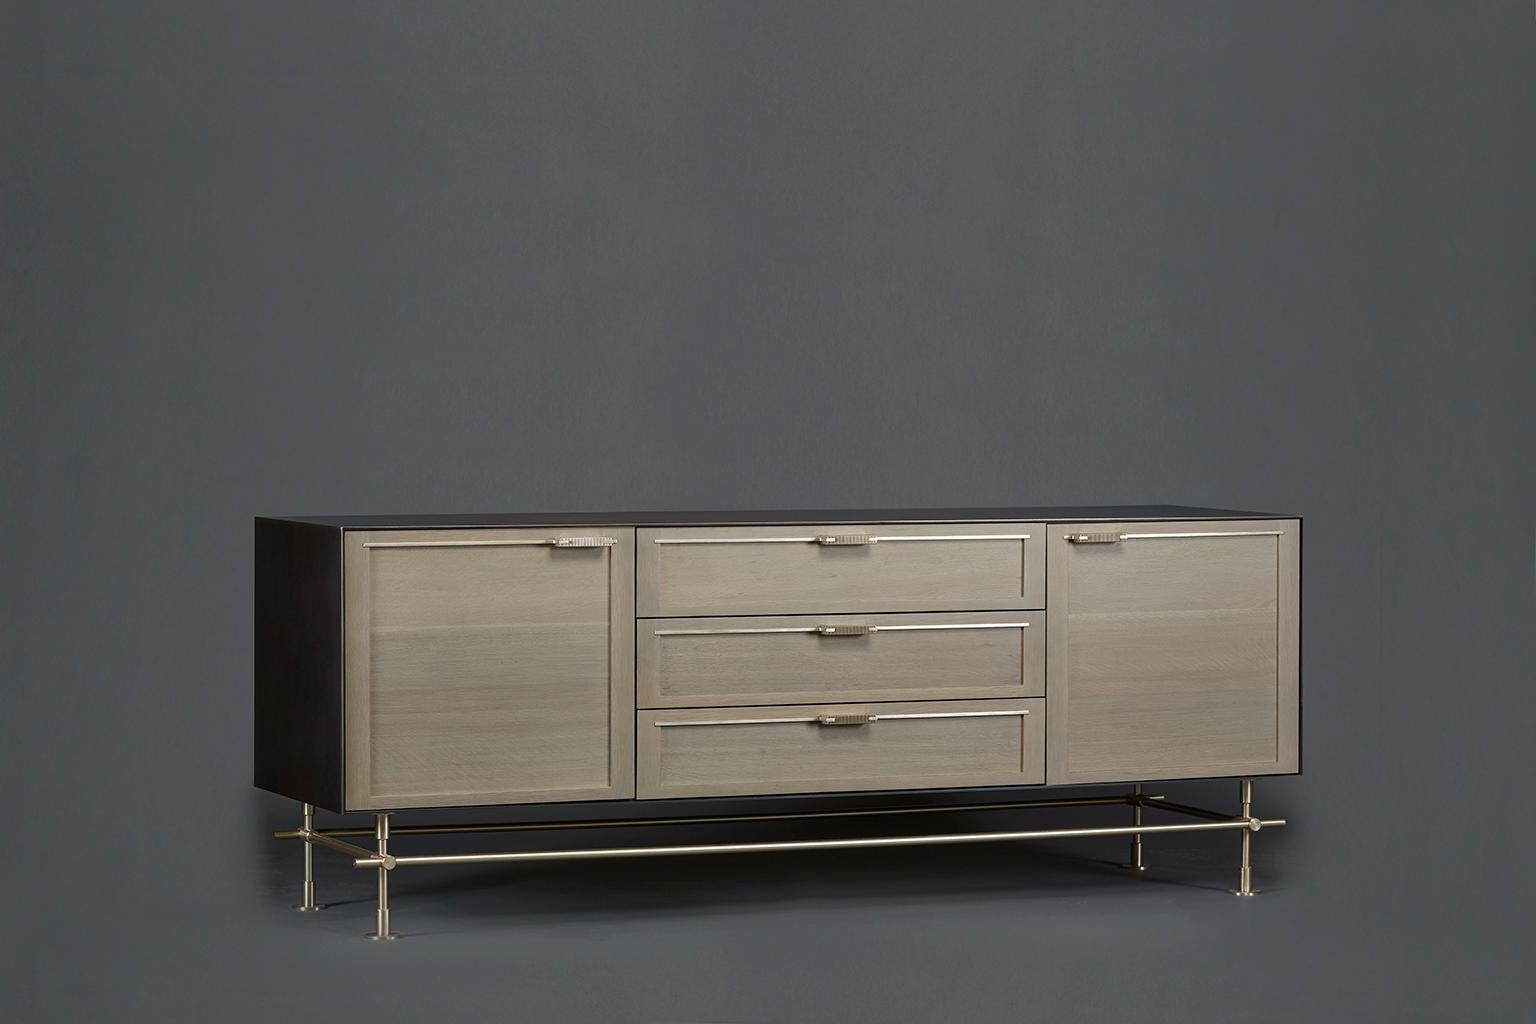 This Maker sideboard is the perfect addition to a dining room, bedroom, kitchen or banquet hall. With an outer cladding of solid blackened steel, the white oak door and drawer faces are finished in a soft, weathered gray. The balance of hard and